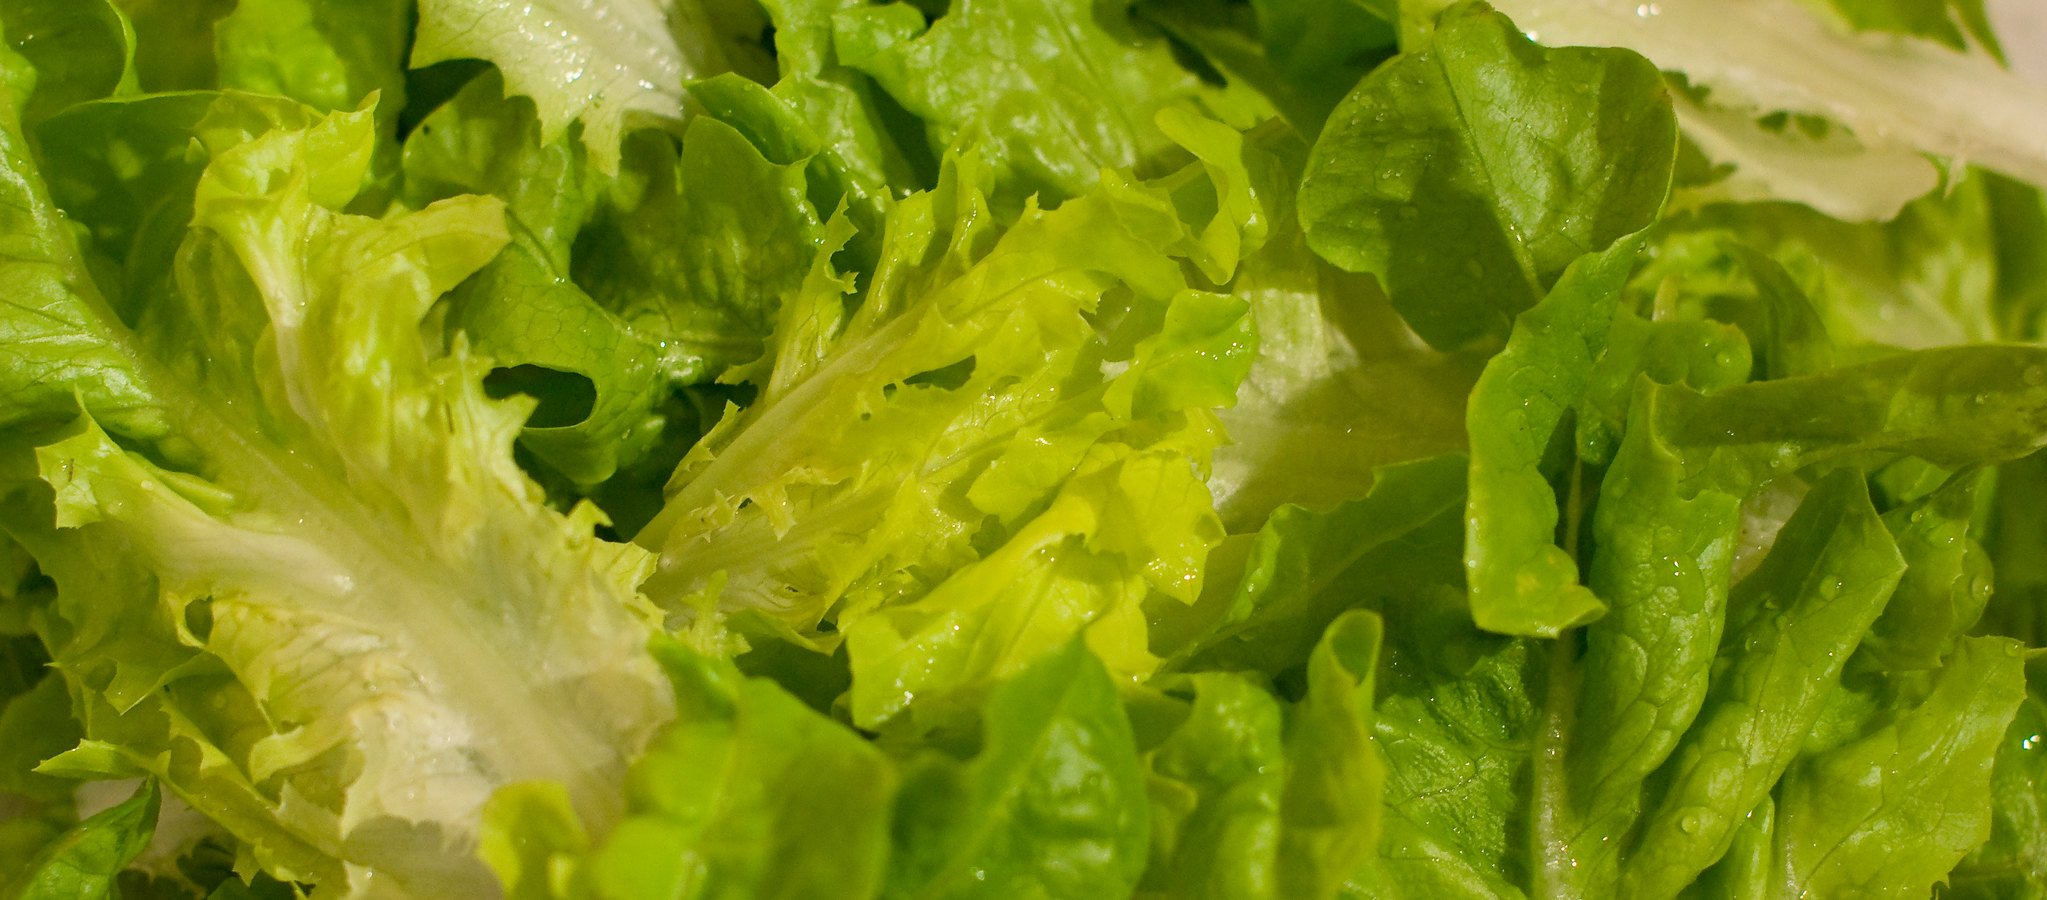 A photo of pieces of fresh, crisp green lettuce. Image taken on August 31, 2008 | Photo: Flickr/Paul Tomlin